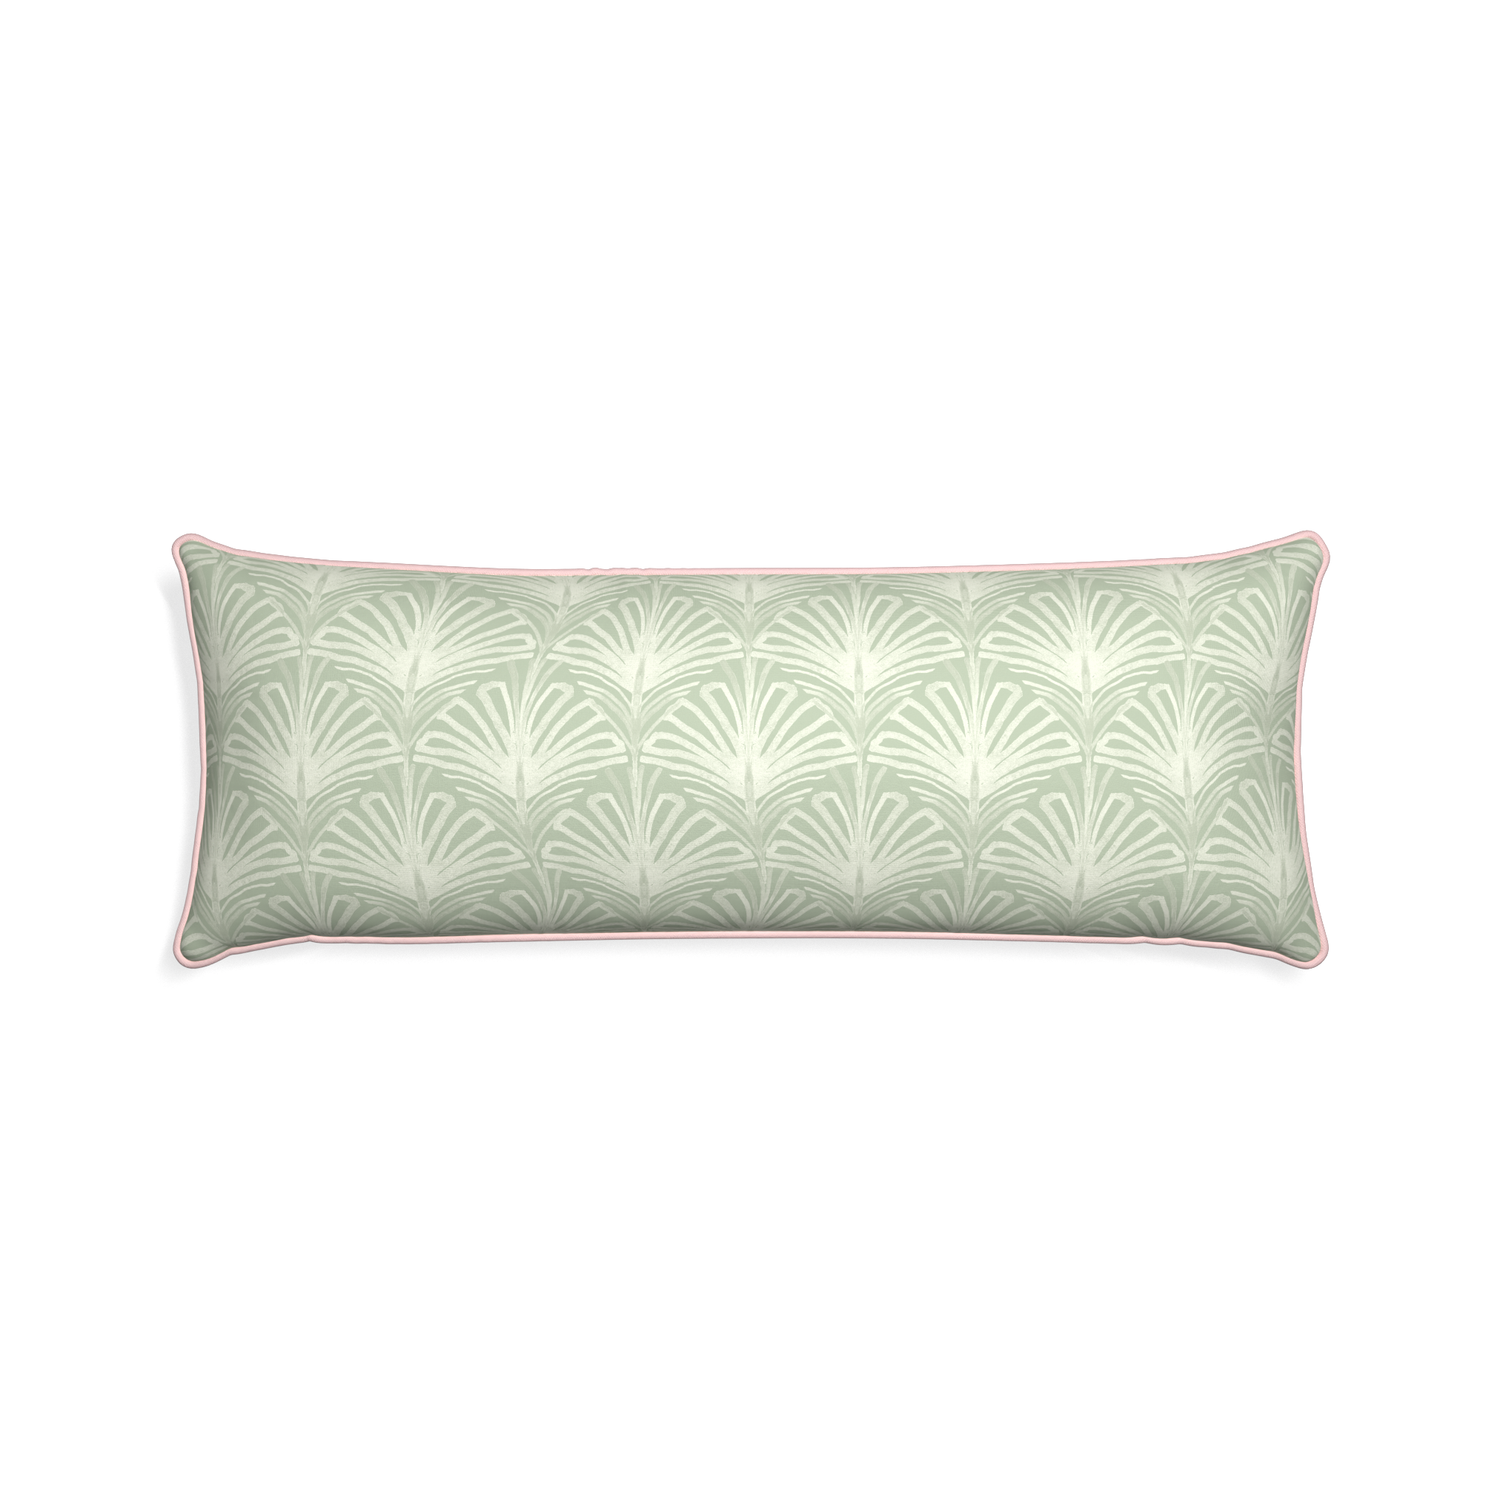 Xl-lumbar suzy sage custom sage green palmpillow with petal piping on white background